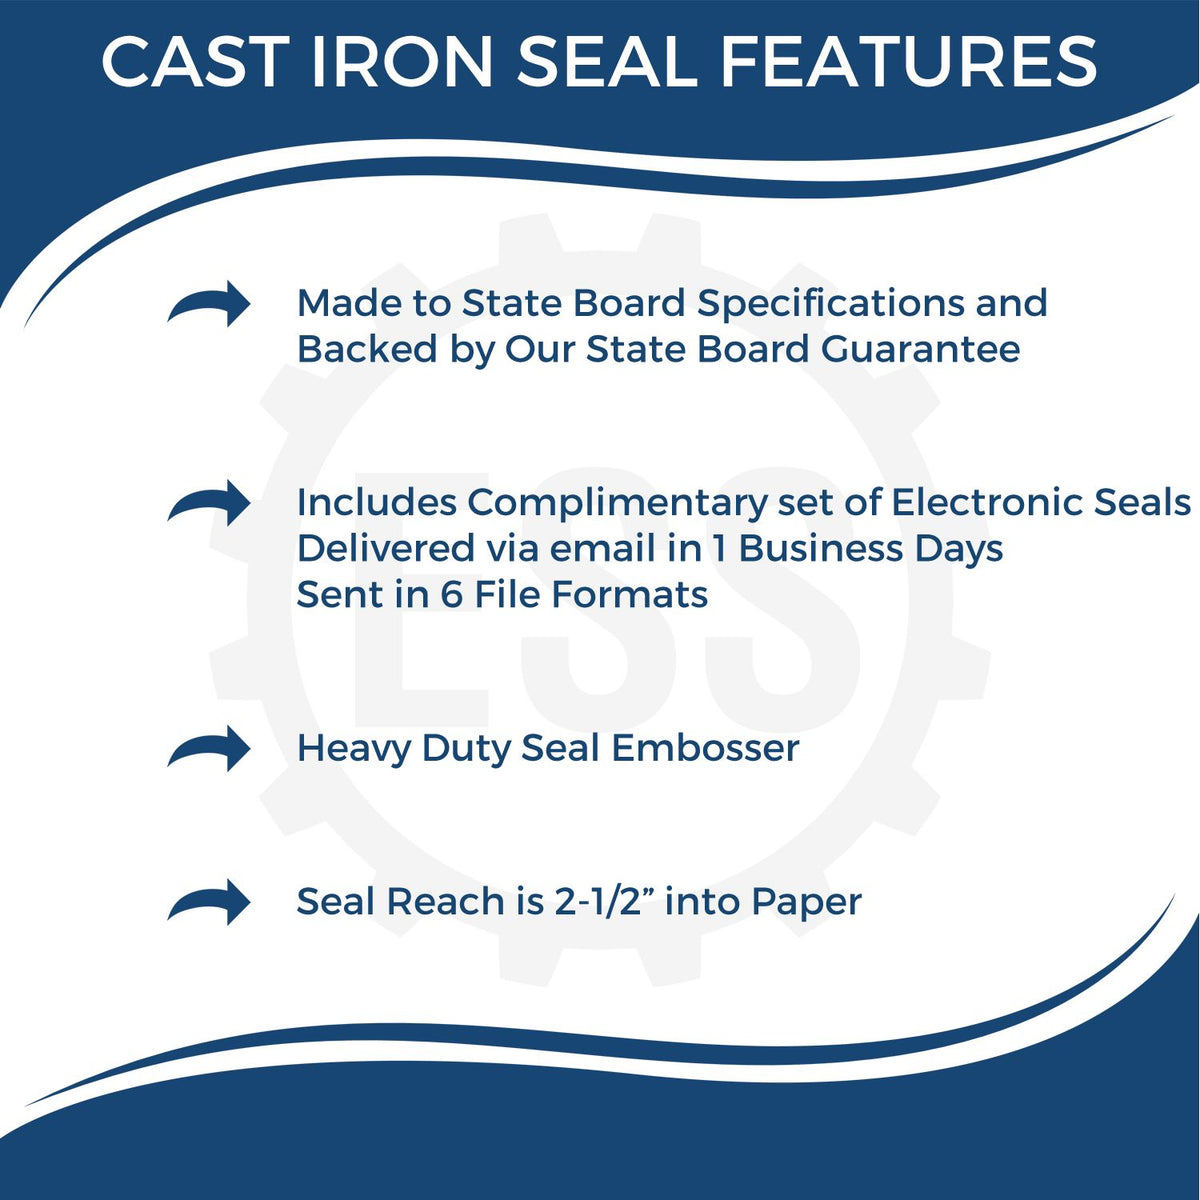 A picture of an infographic highlighting the selling points for the Heavy Duty Cast Iron Arizona Land Surveyor Seal Embosser